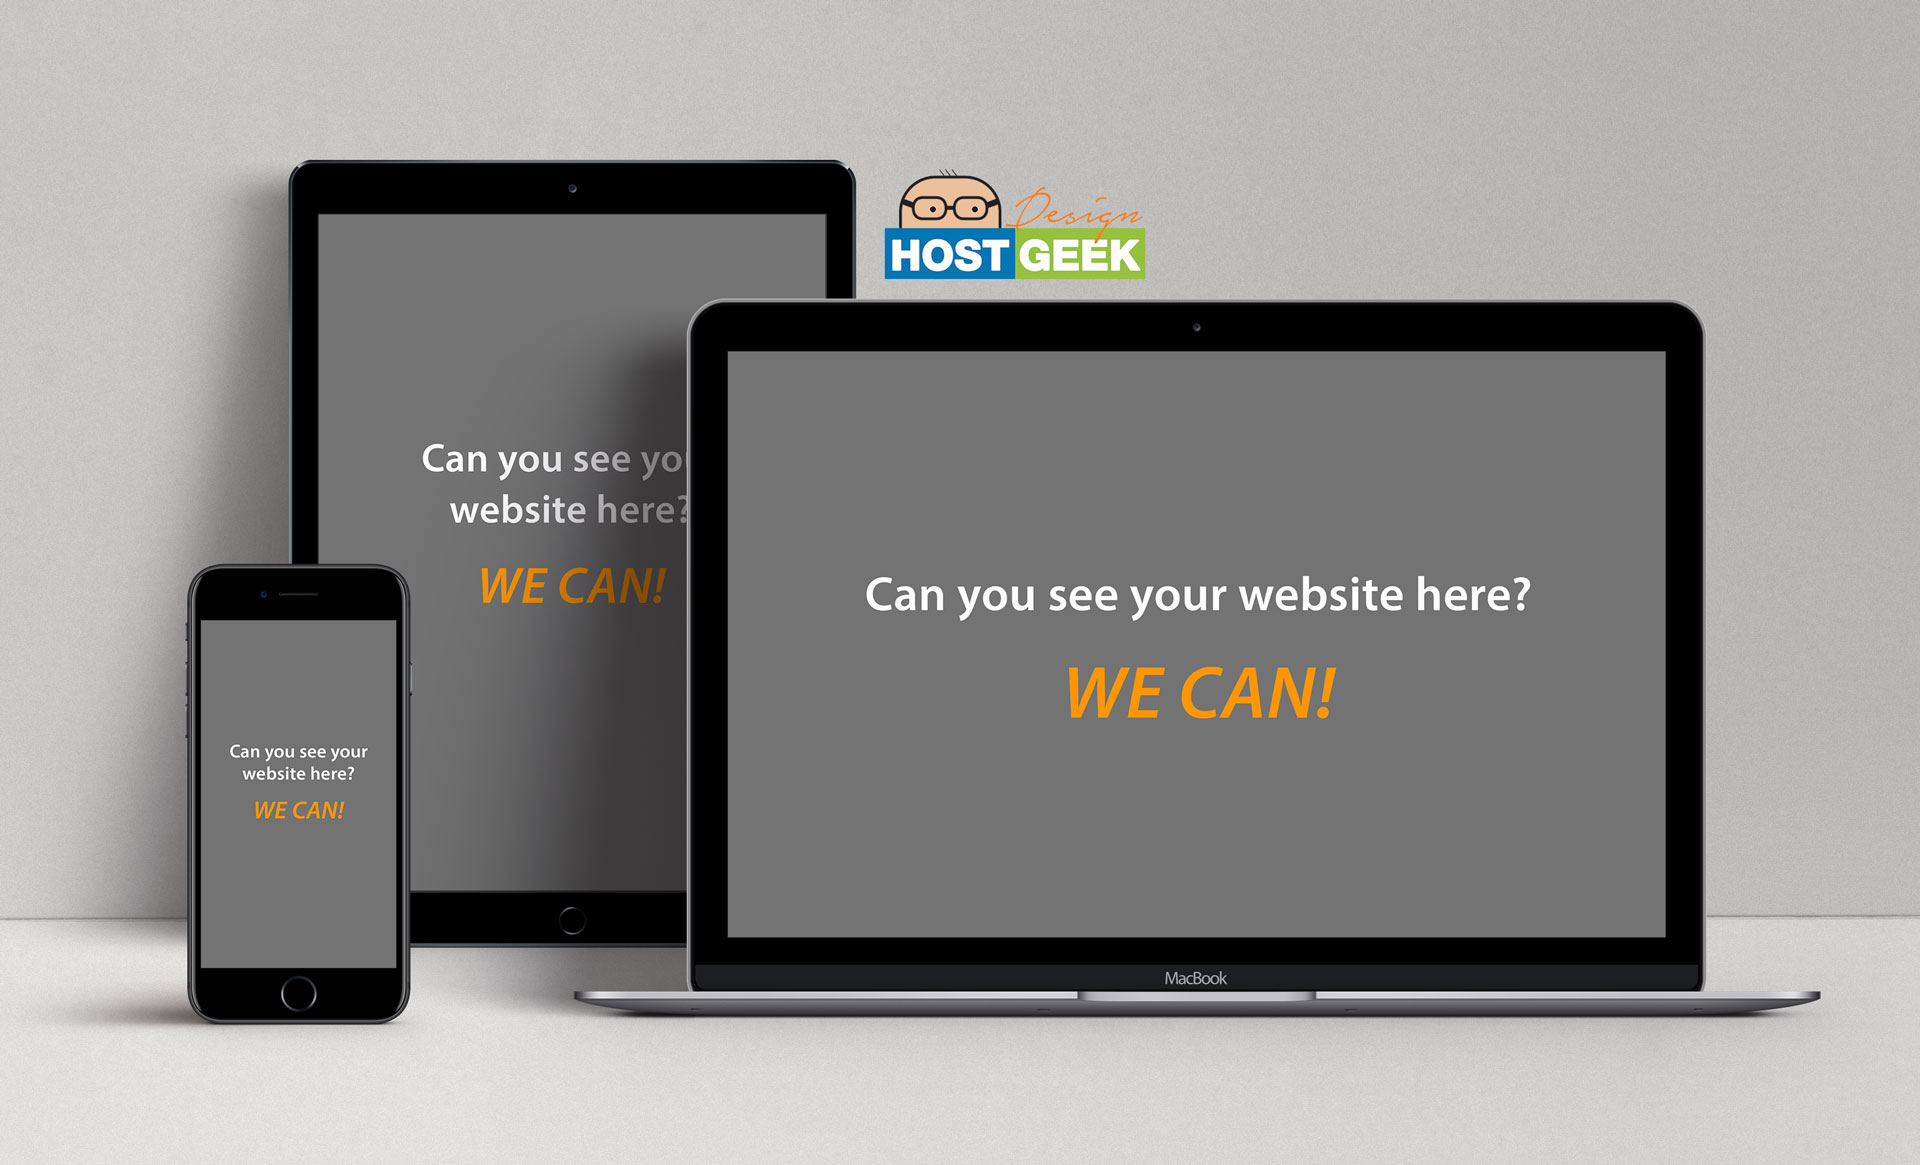 We can see your website here!